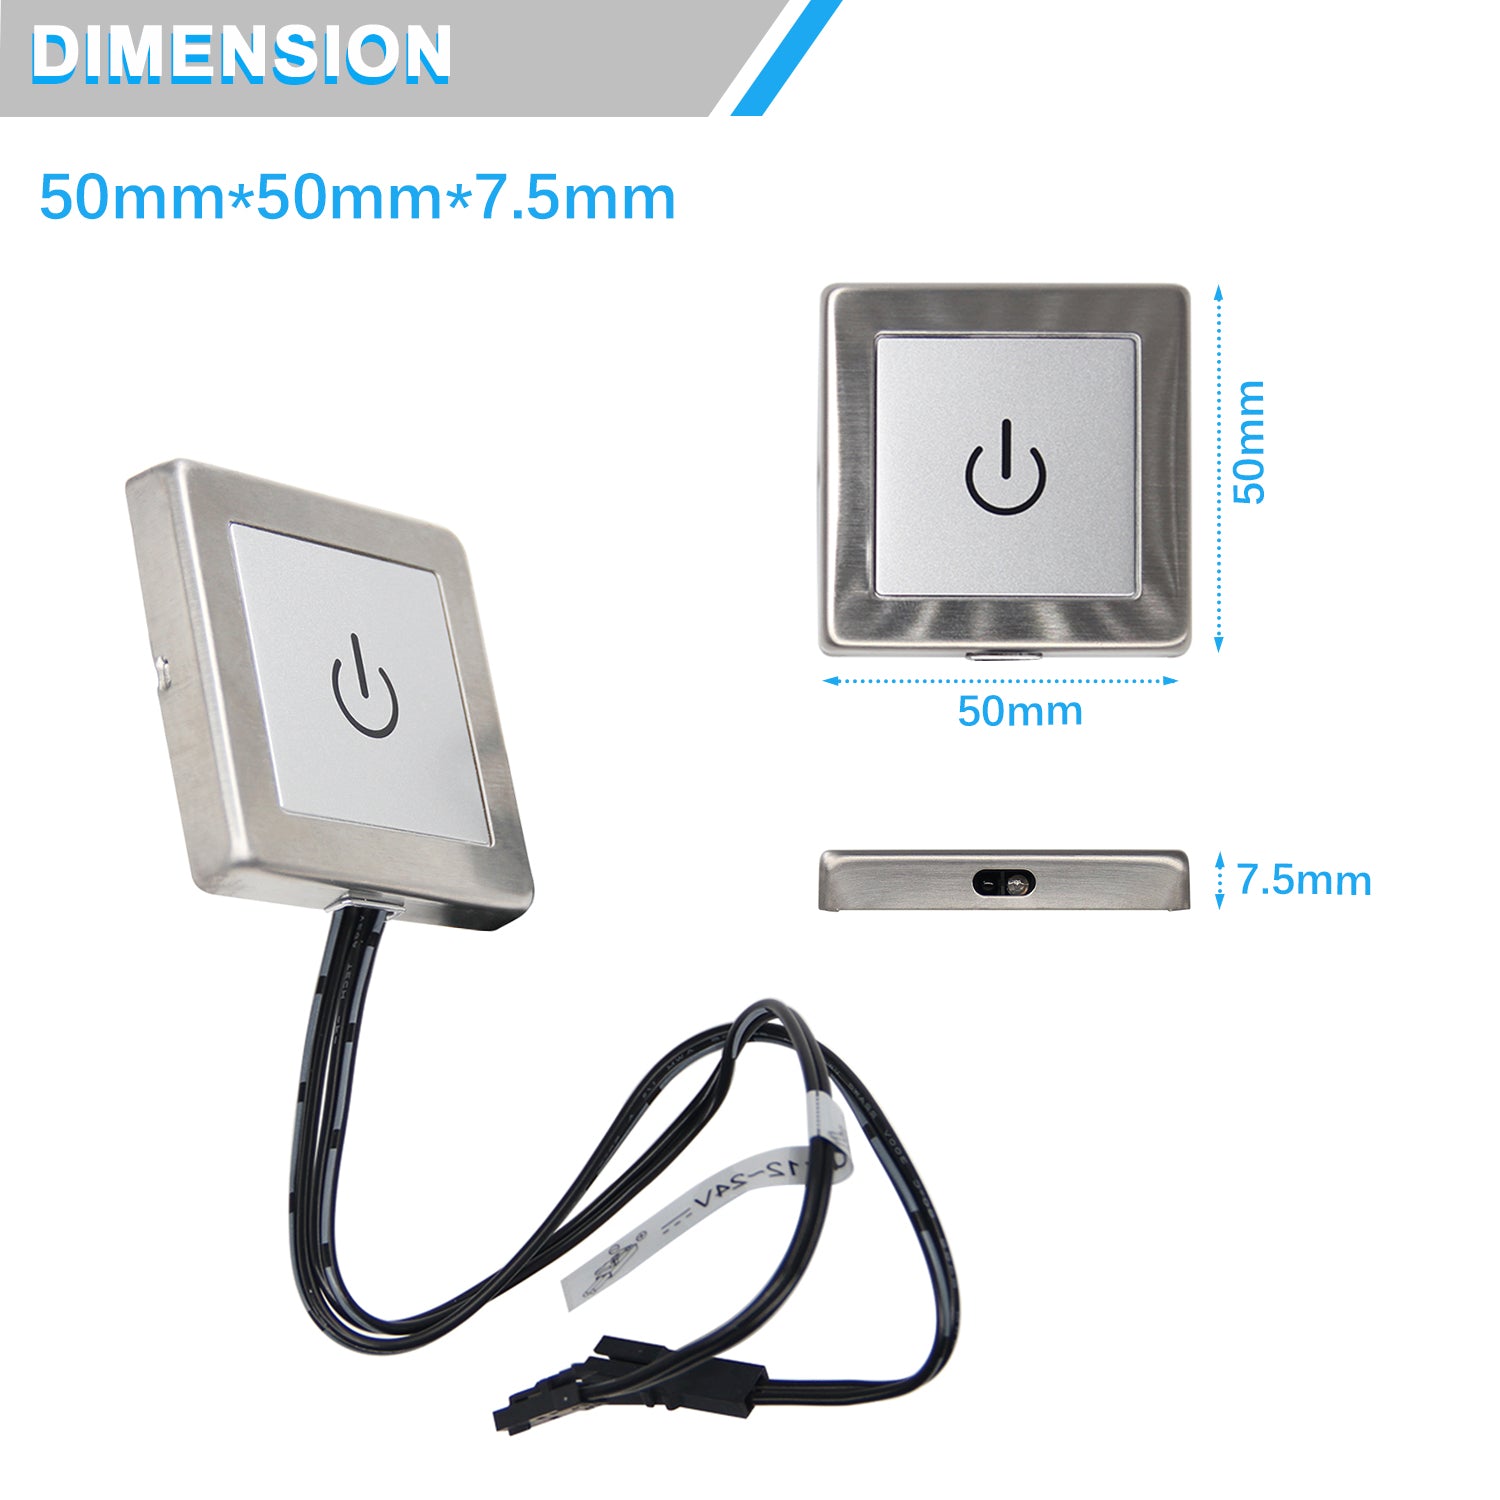 Send inquiry for 12V Hand Wave Sensor Button 30W Smart Home Light Switch with RoHS for Strip Light,Downlight to high quality Hand Wave Sensor Button supplier. Wholesale Smart Home Light Switch directly from China Hand Wave Sensor Button manufacturers/exporters. Get a factory sale price list and become a distributor/agent-vstled.com.